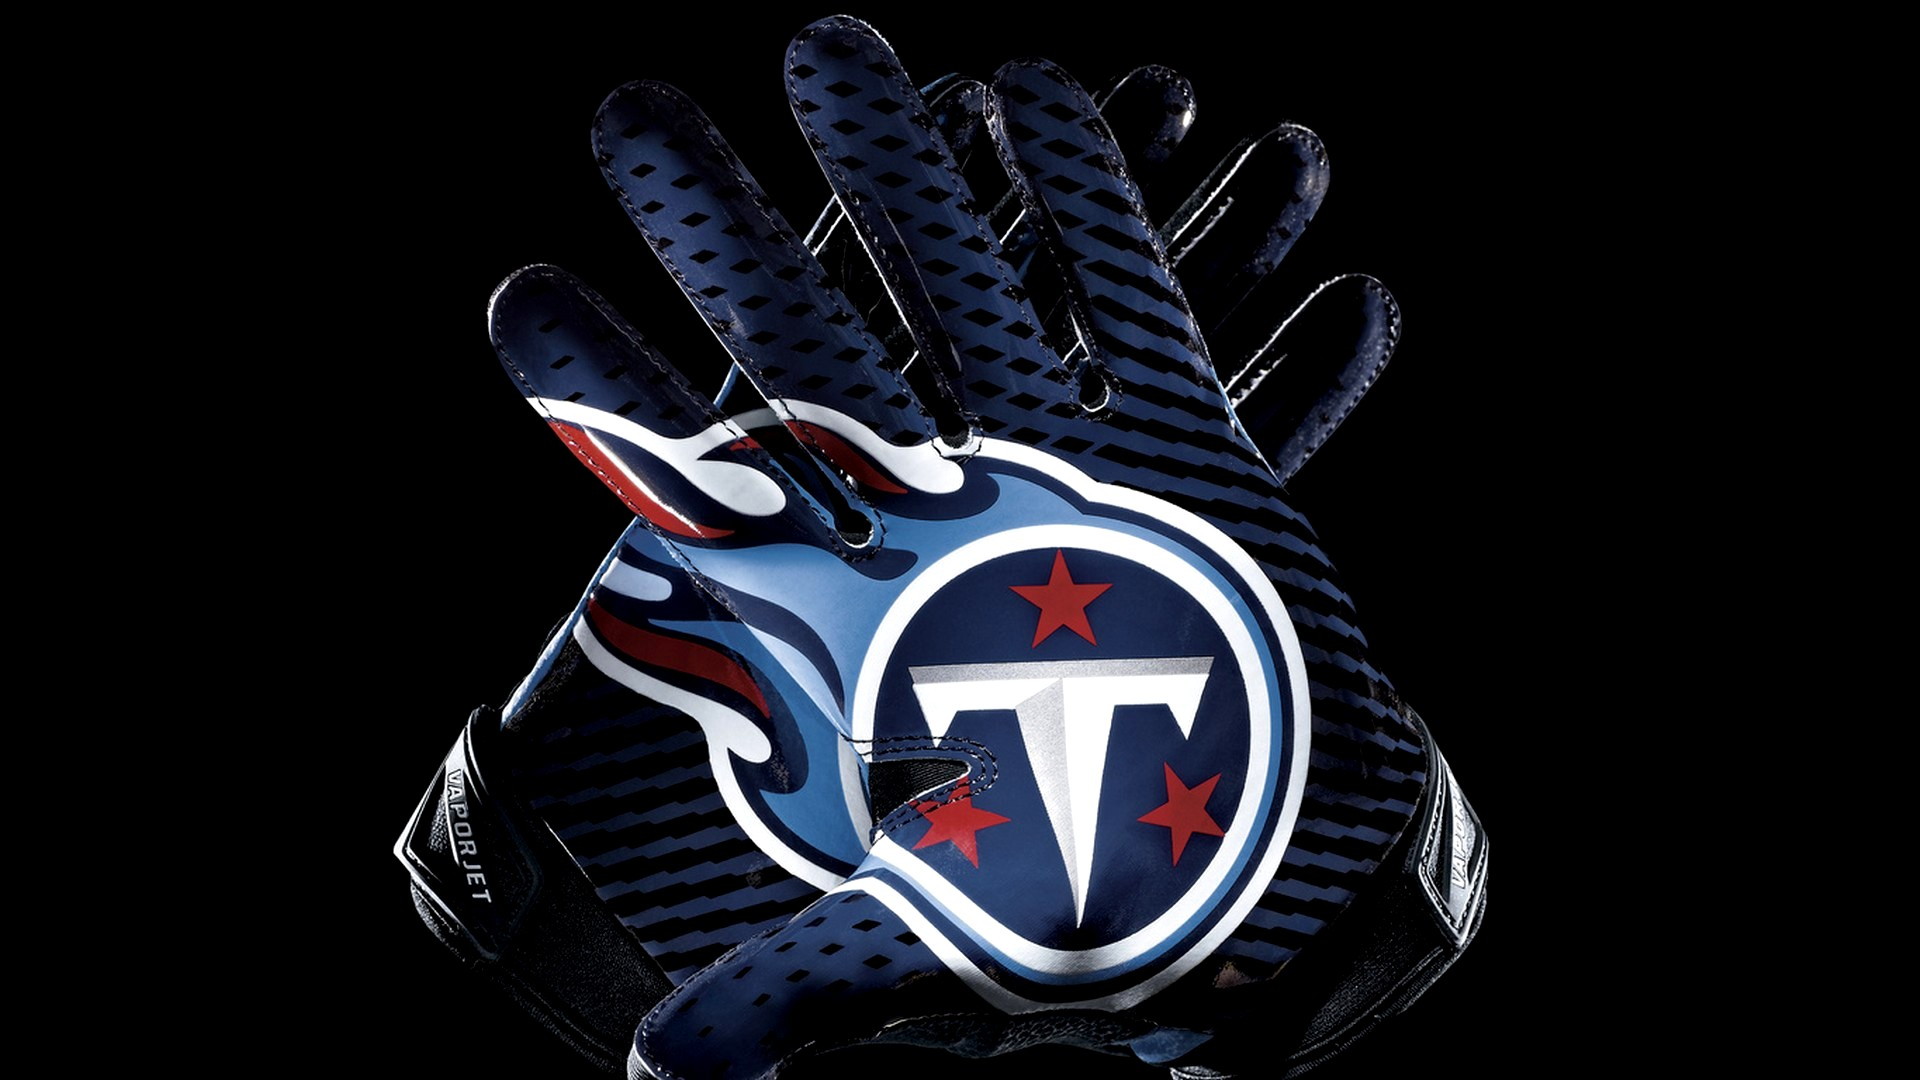 Tennessee Titans Mac Wallpaper with high-resolution 1920x1080 pixel. You can use and set as wallpaper for Notebook Screensavers, Mac Wallpapers, Mobile Home Screen, iPhone or Android Phones Lock Screen